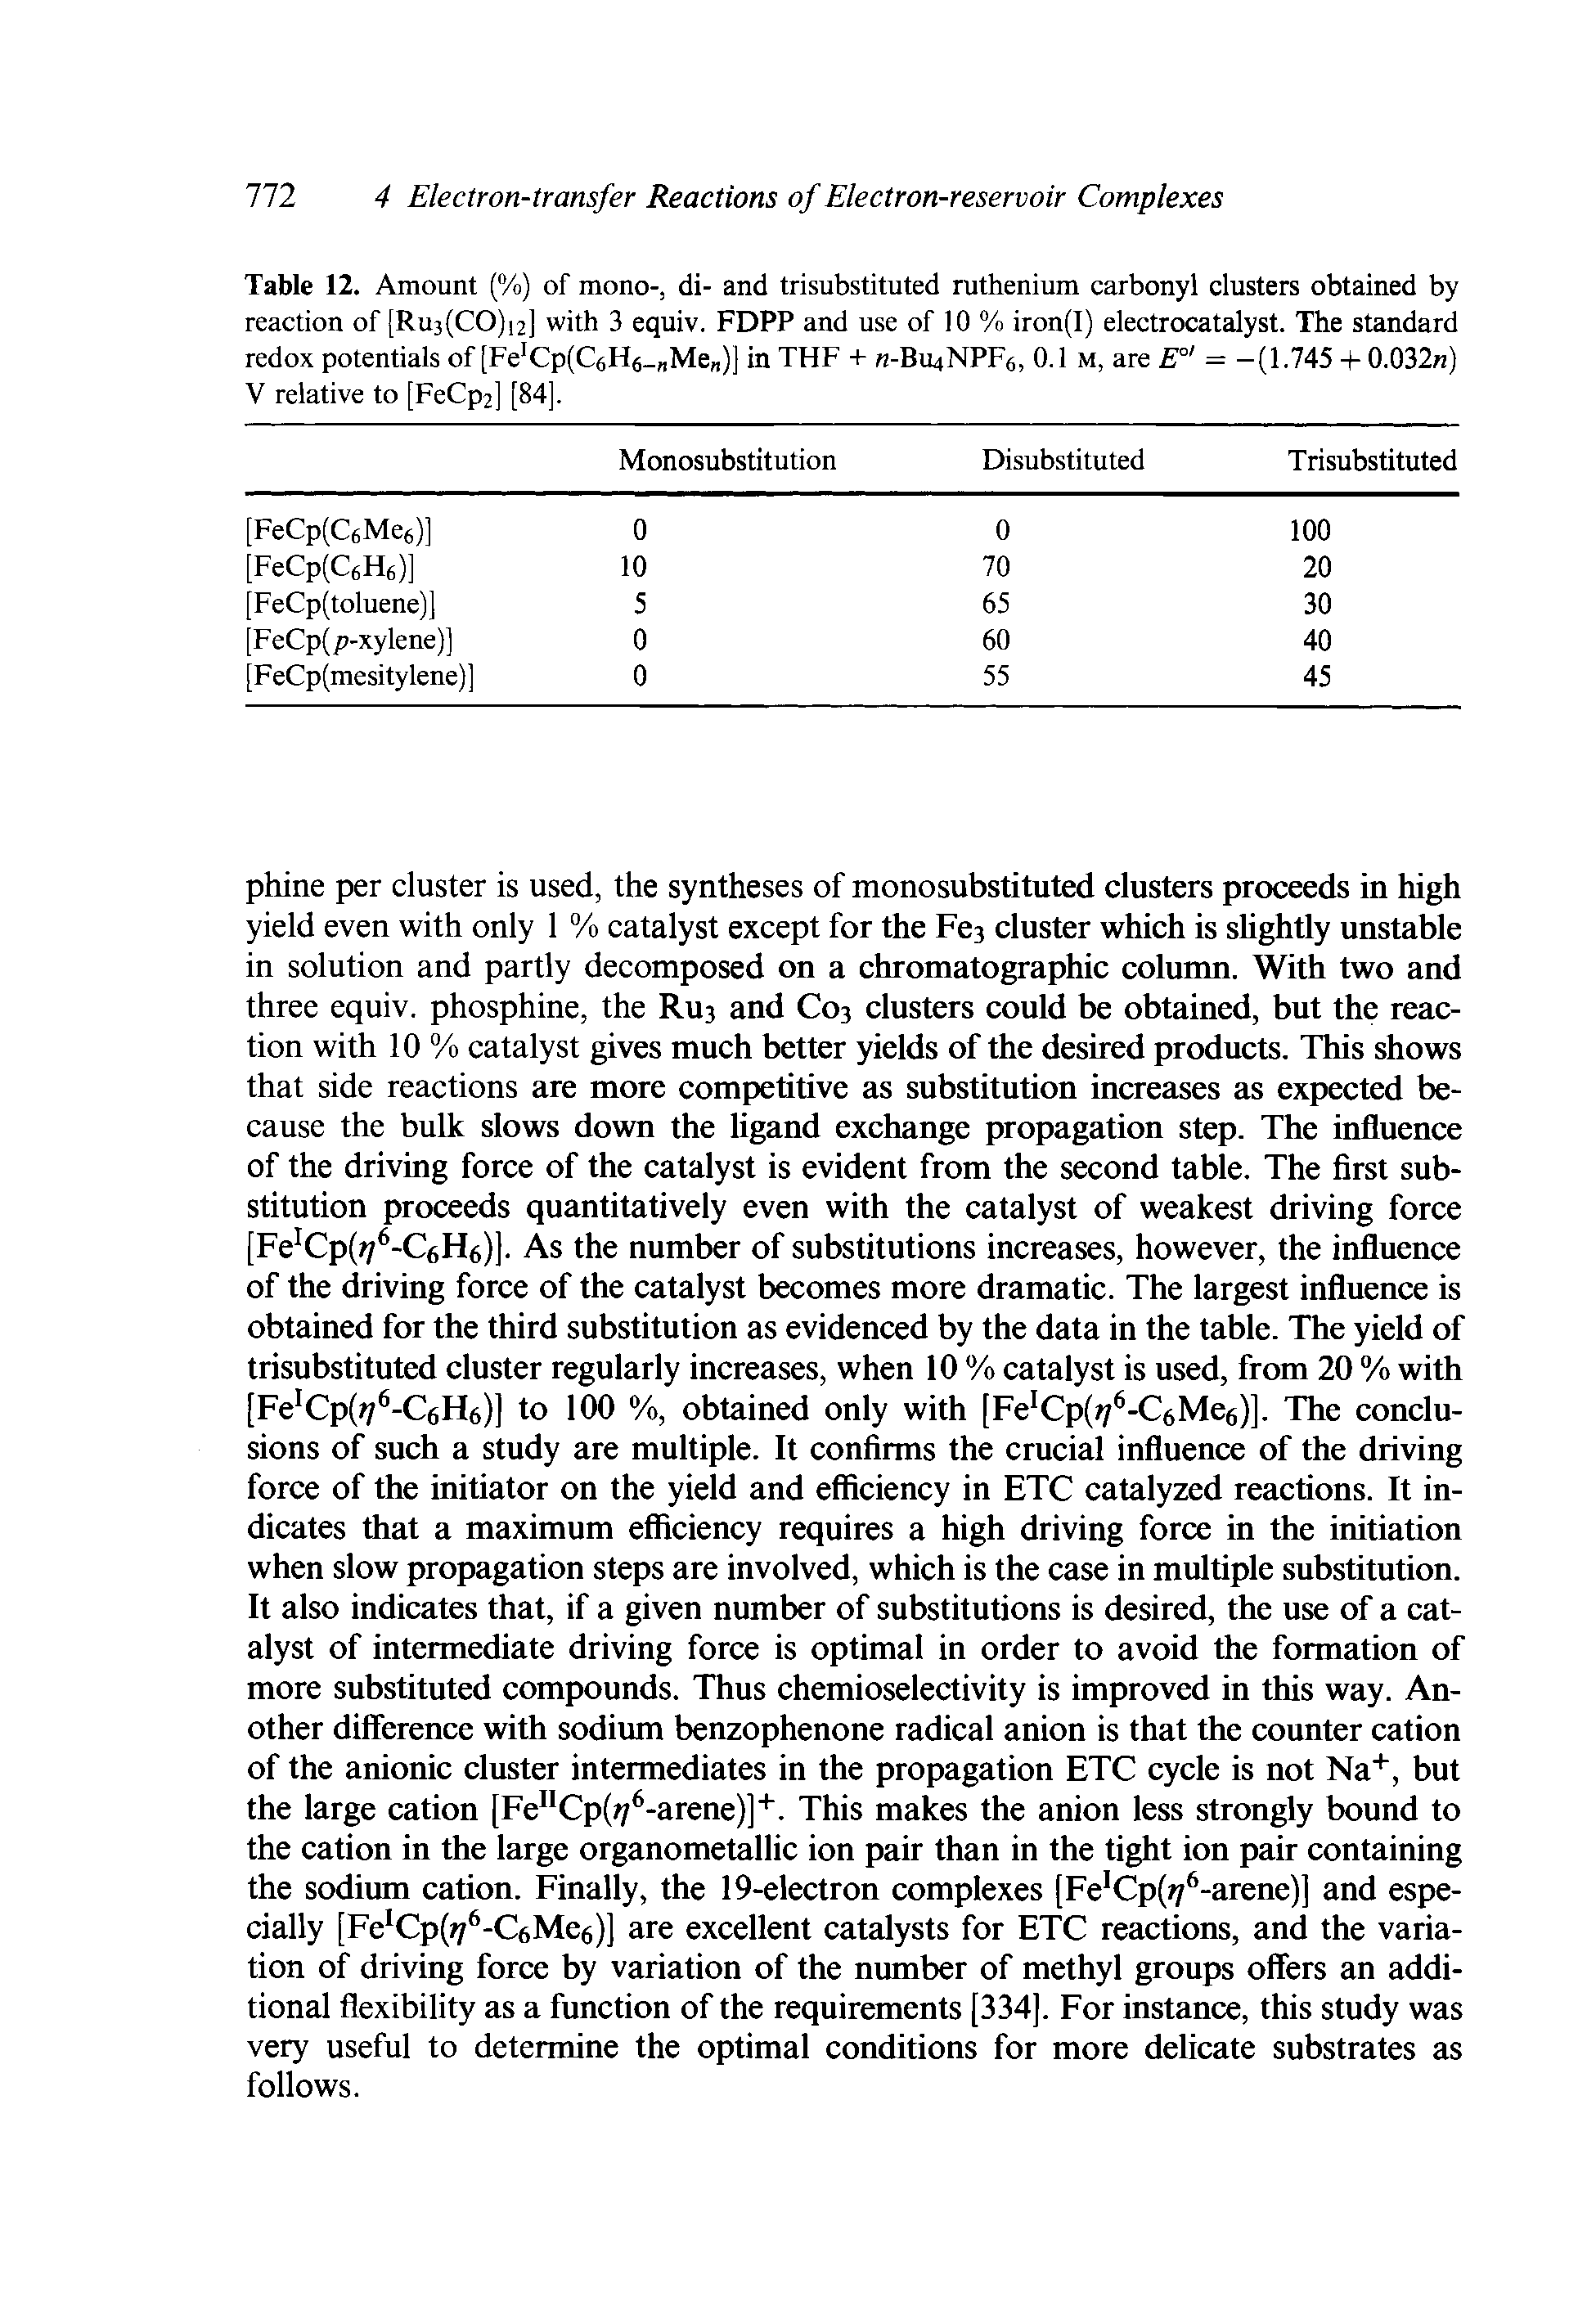 Table 12. Amount (%) of mono-, di- and trisubstituted ruthenium carbonyl clusters obtained by reaction of [Ru3(CO)i2] with 3 equiv. FDPP and use of 10 % iron(I) electrocatalyst. The standard redox potentials of [Fe Cp(C6H6 Me )] in THF + -Bu4NPF6, 0.1 m, are E° = -(1.745 0.032n)...